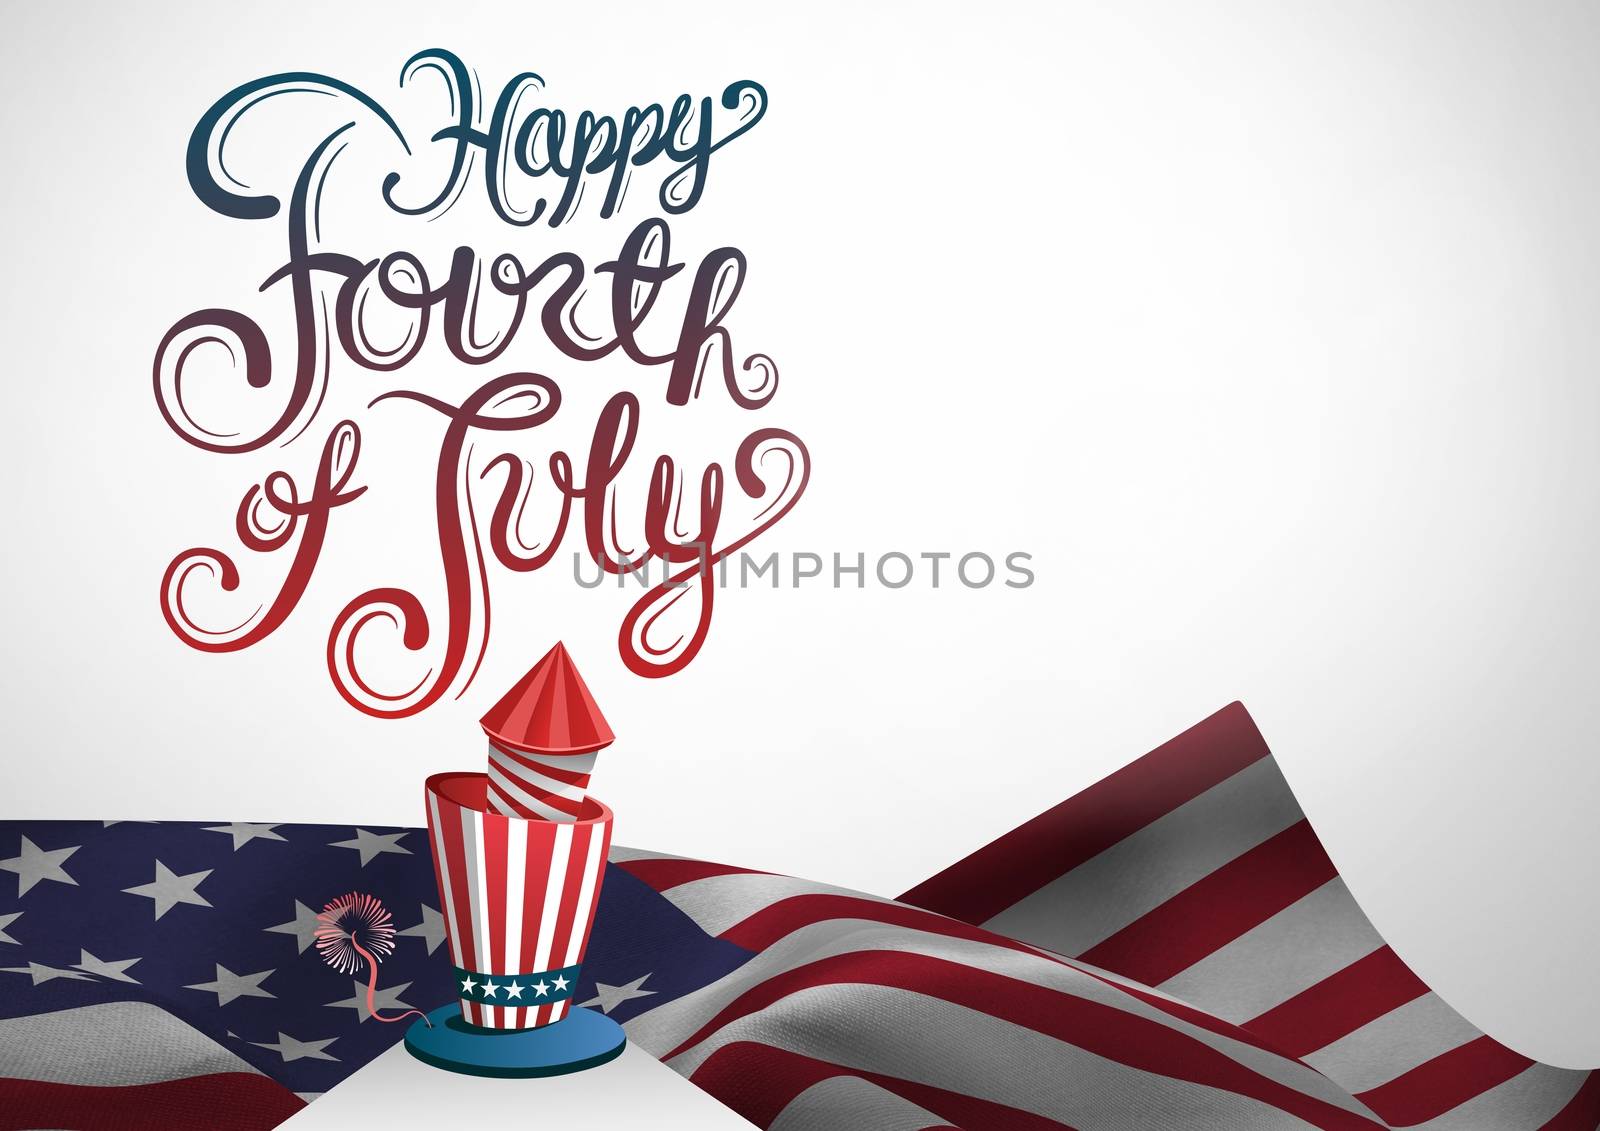 Digital composite of Composite image for the 4th of July with american flag